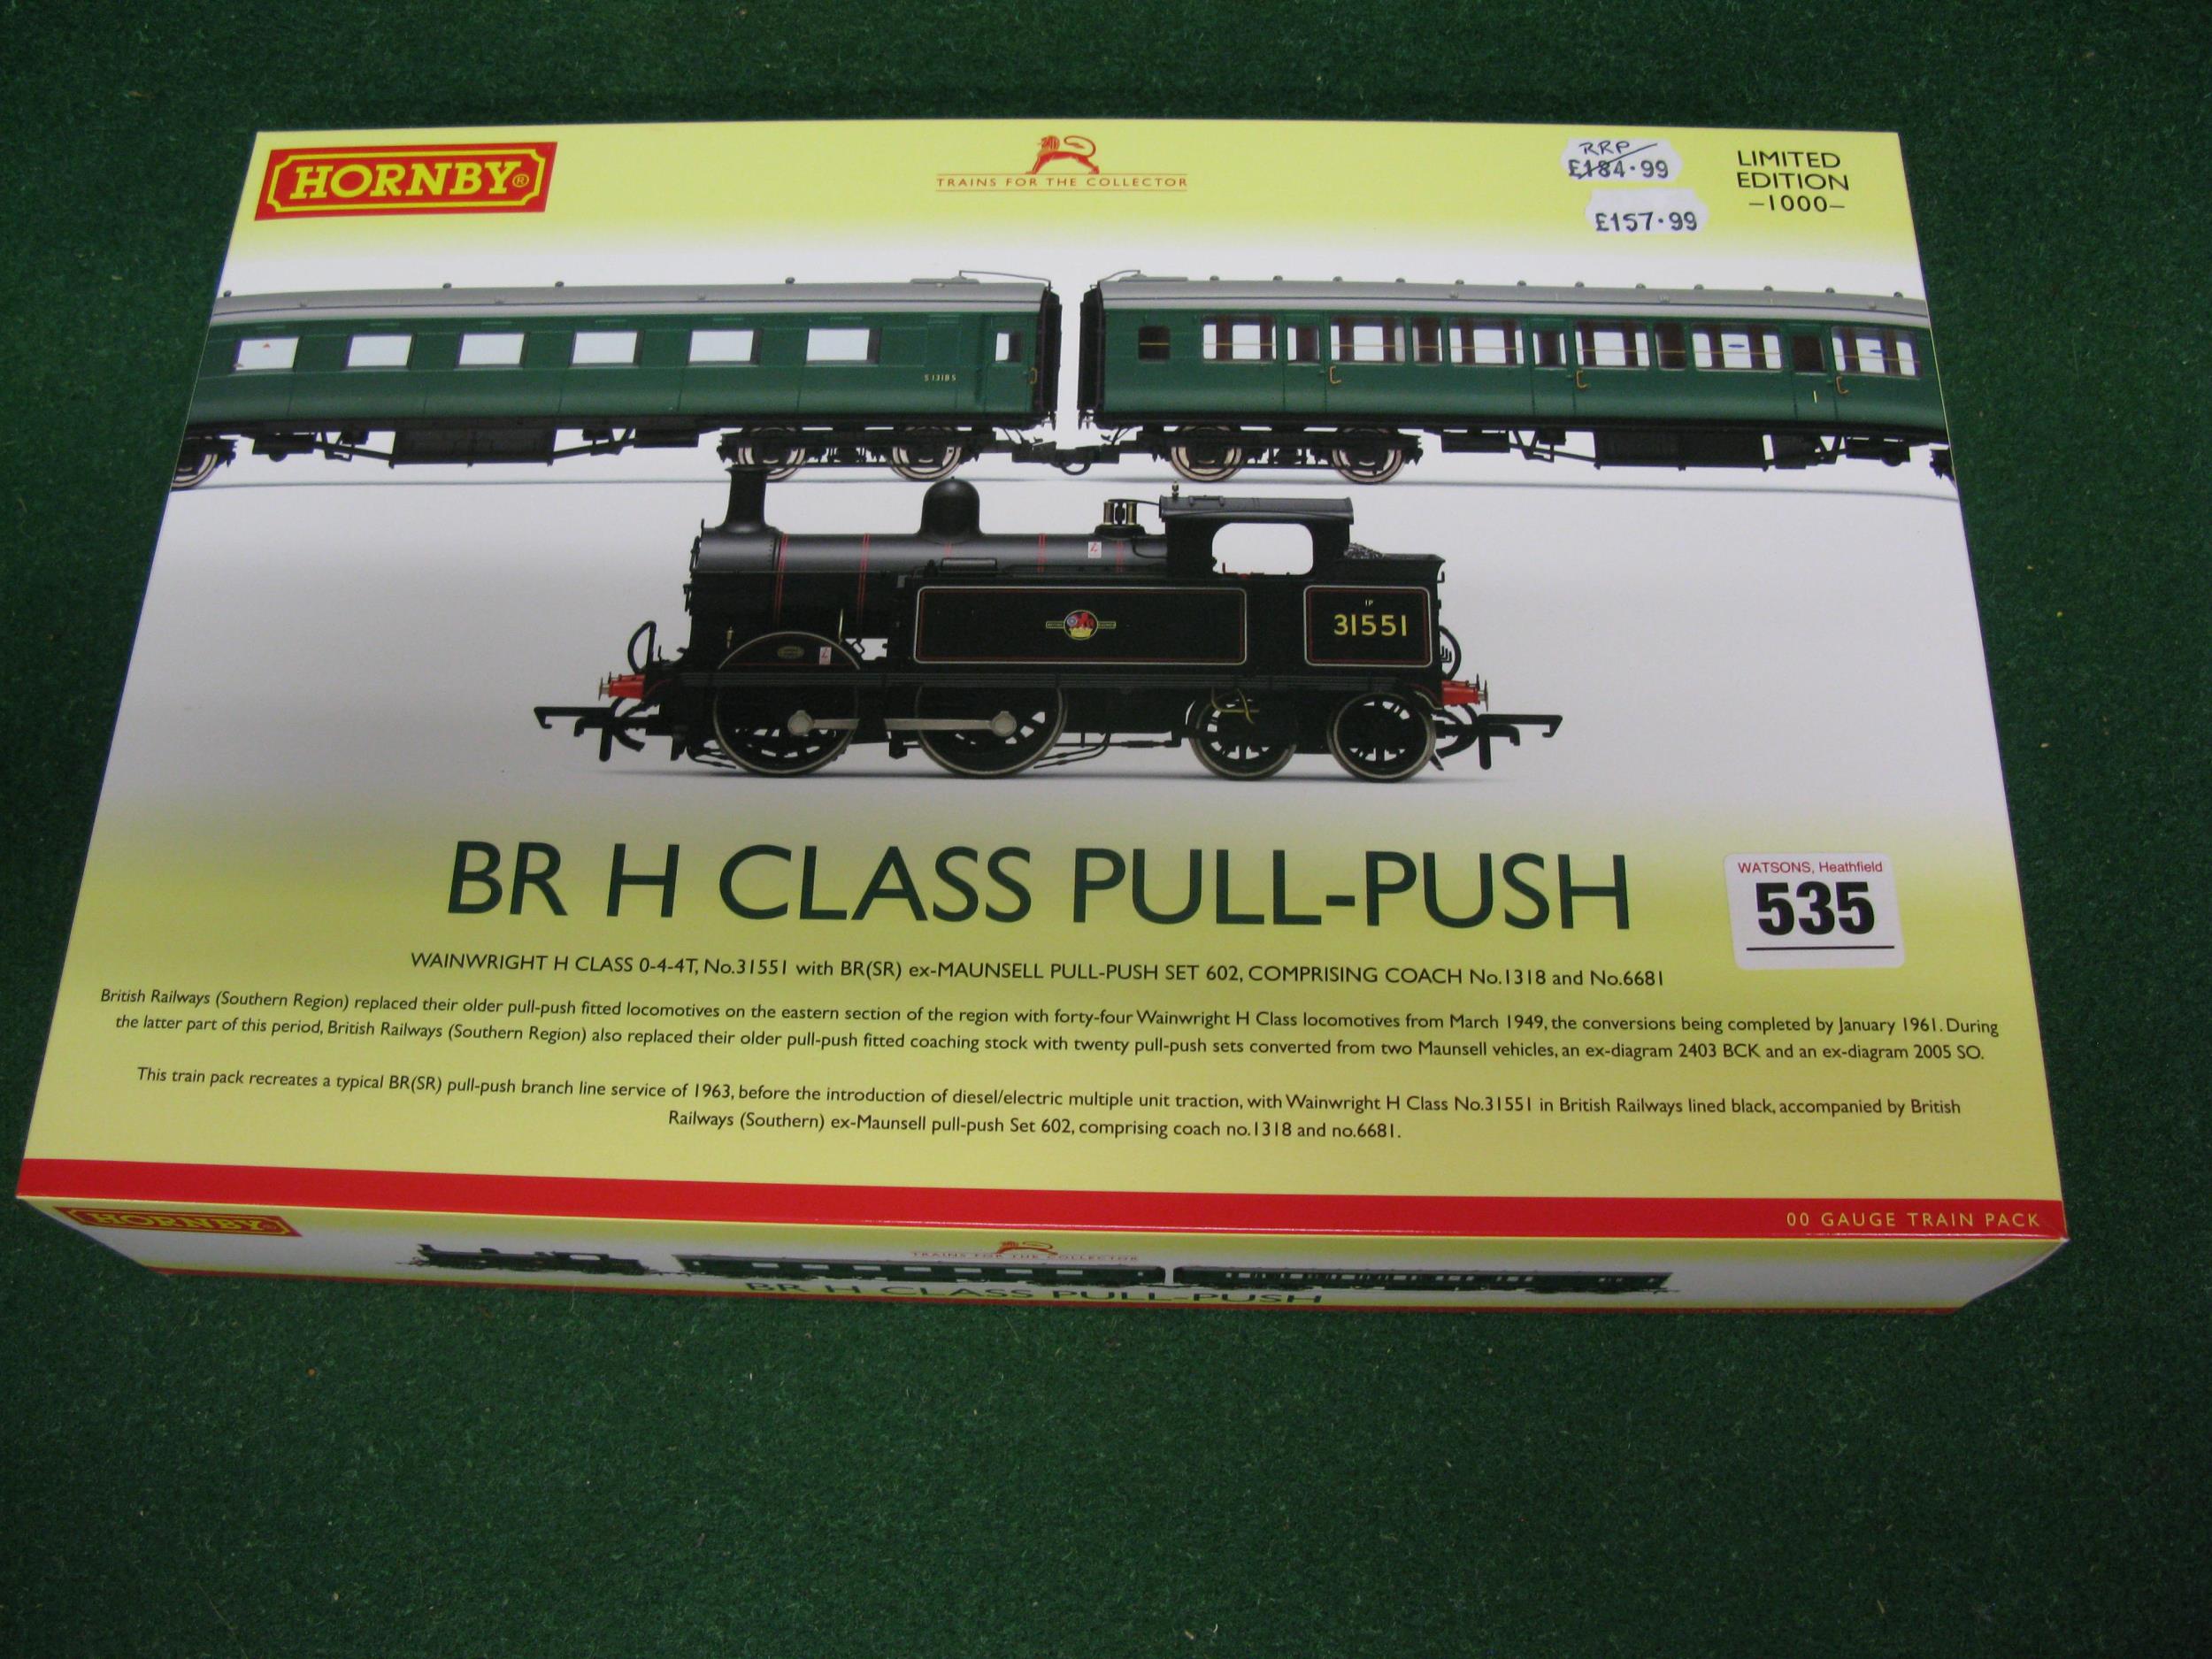 Unused Boxed Hornby OO BR H Class Pull-Push set, Limited Edition 281/1000 containing 0-4-4T No. - Image 2 of 3